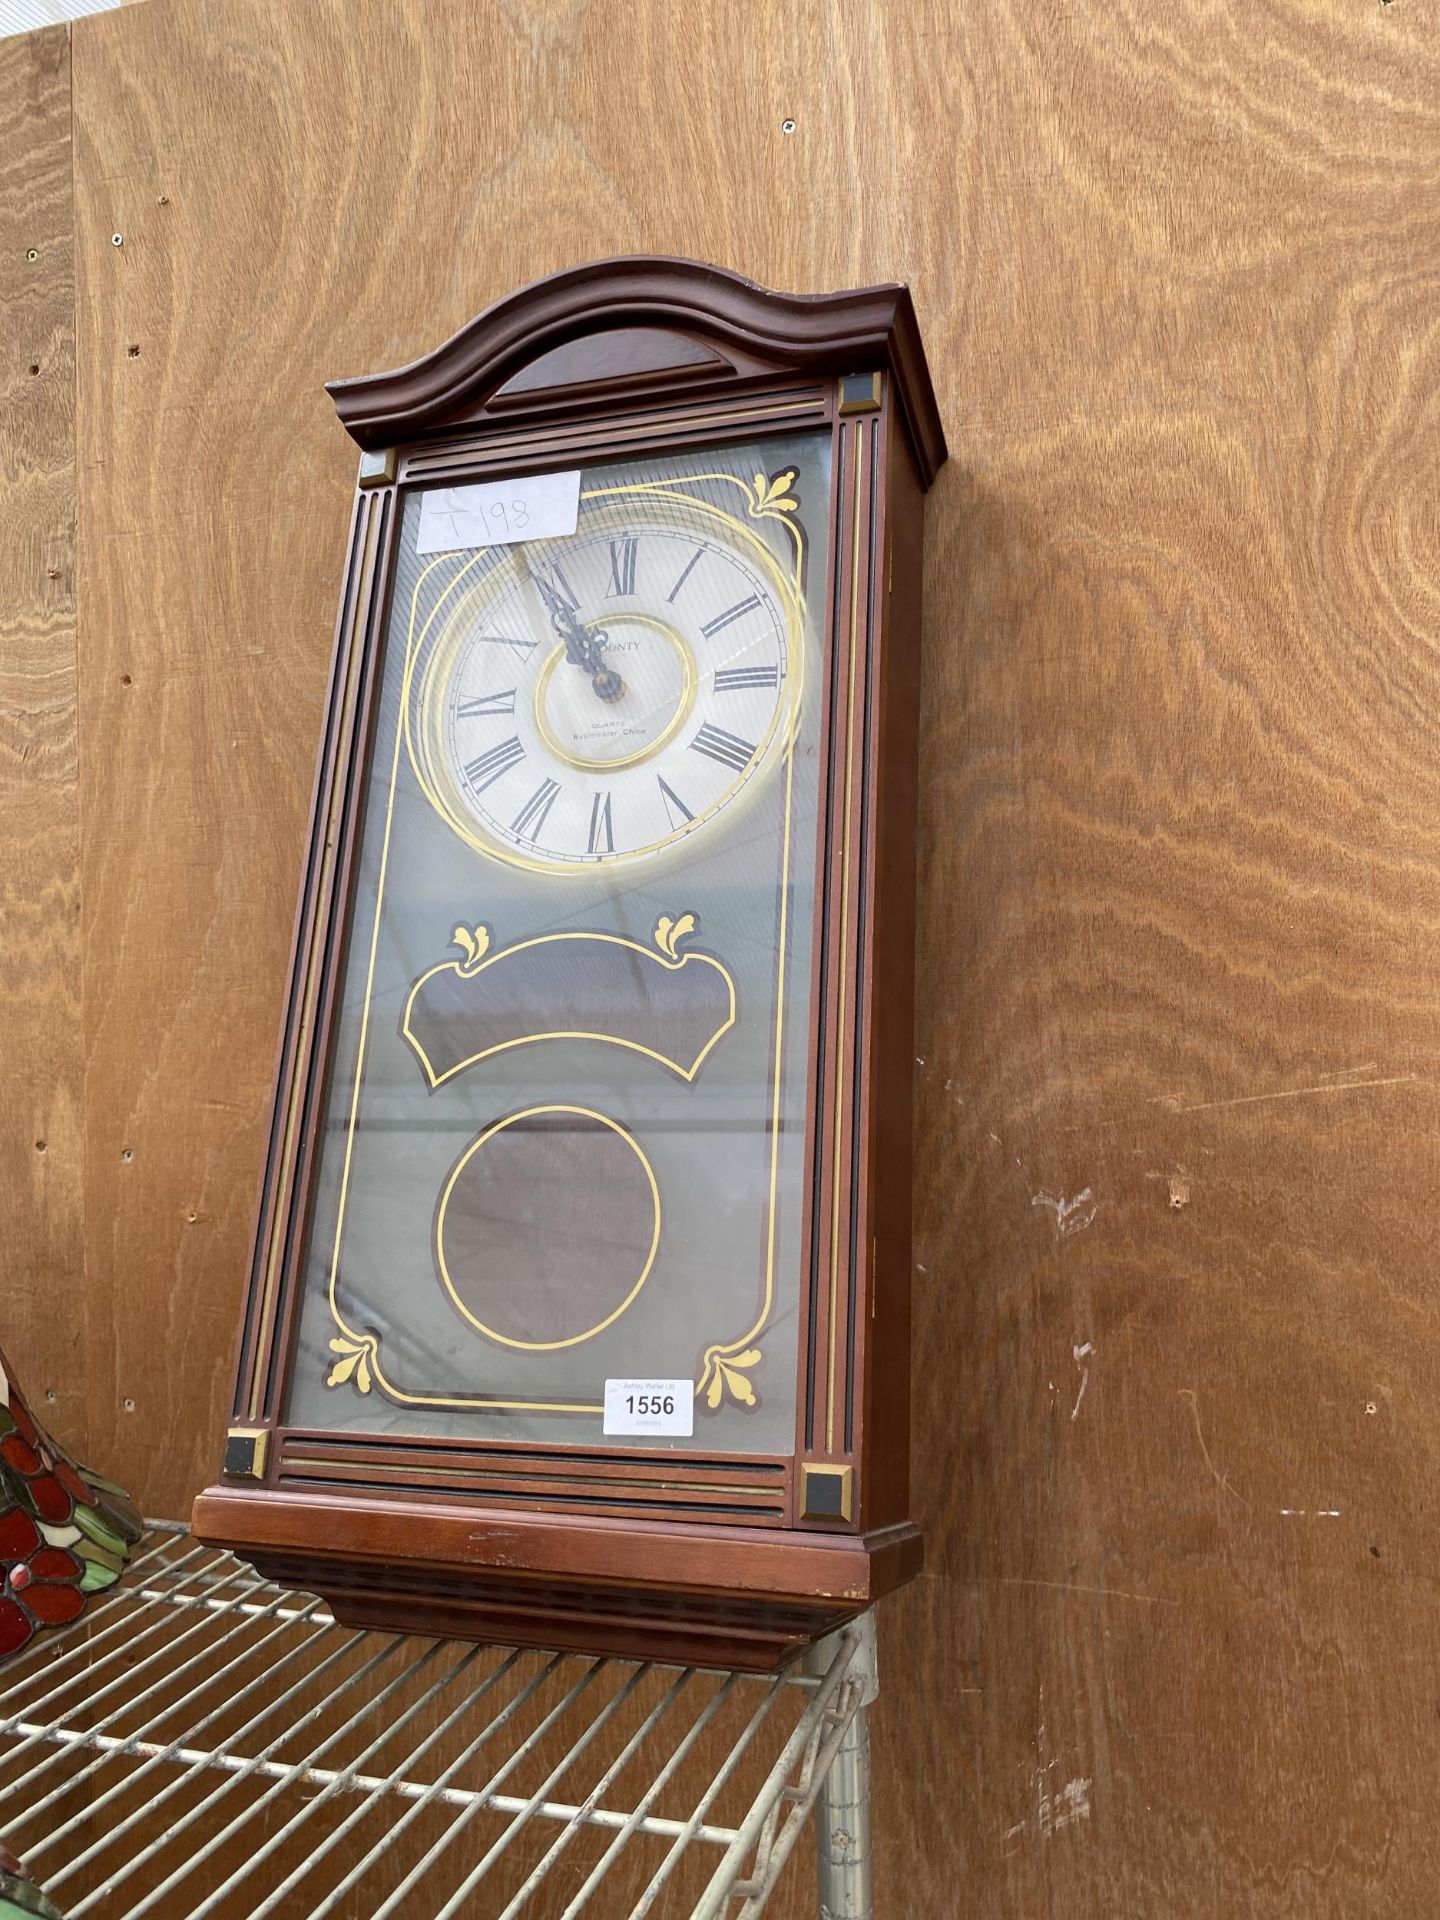 A WOODEN CASED WESTMINISTER CHIME QUARTZ WALL CLOCK